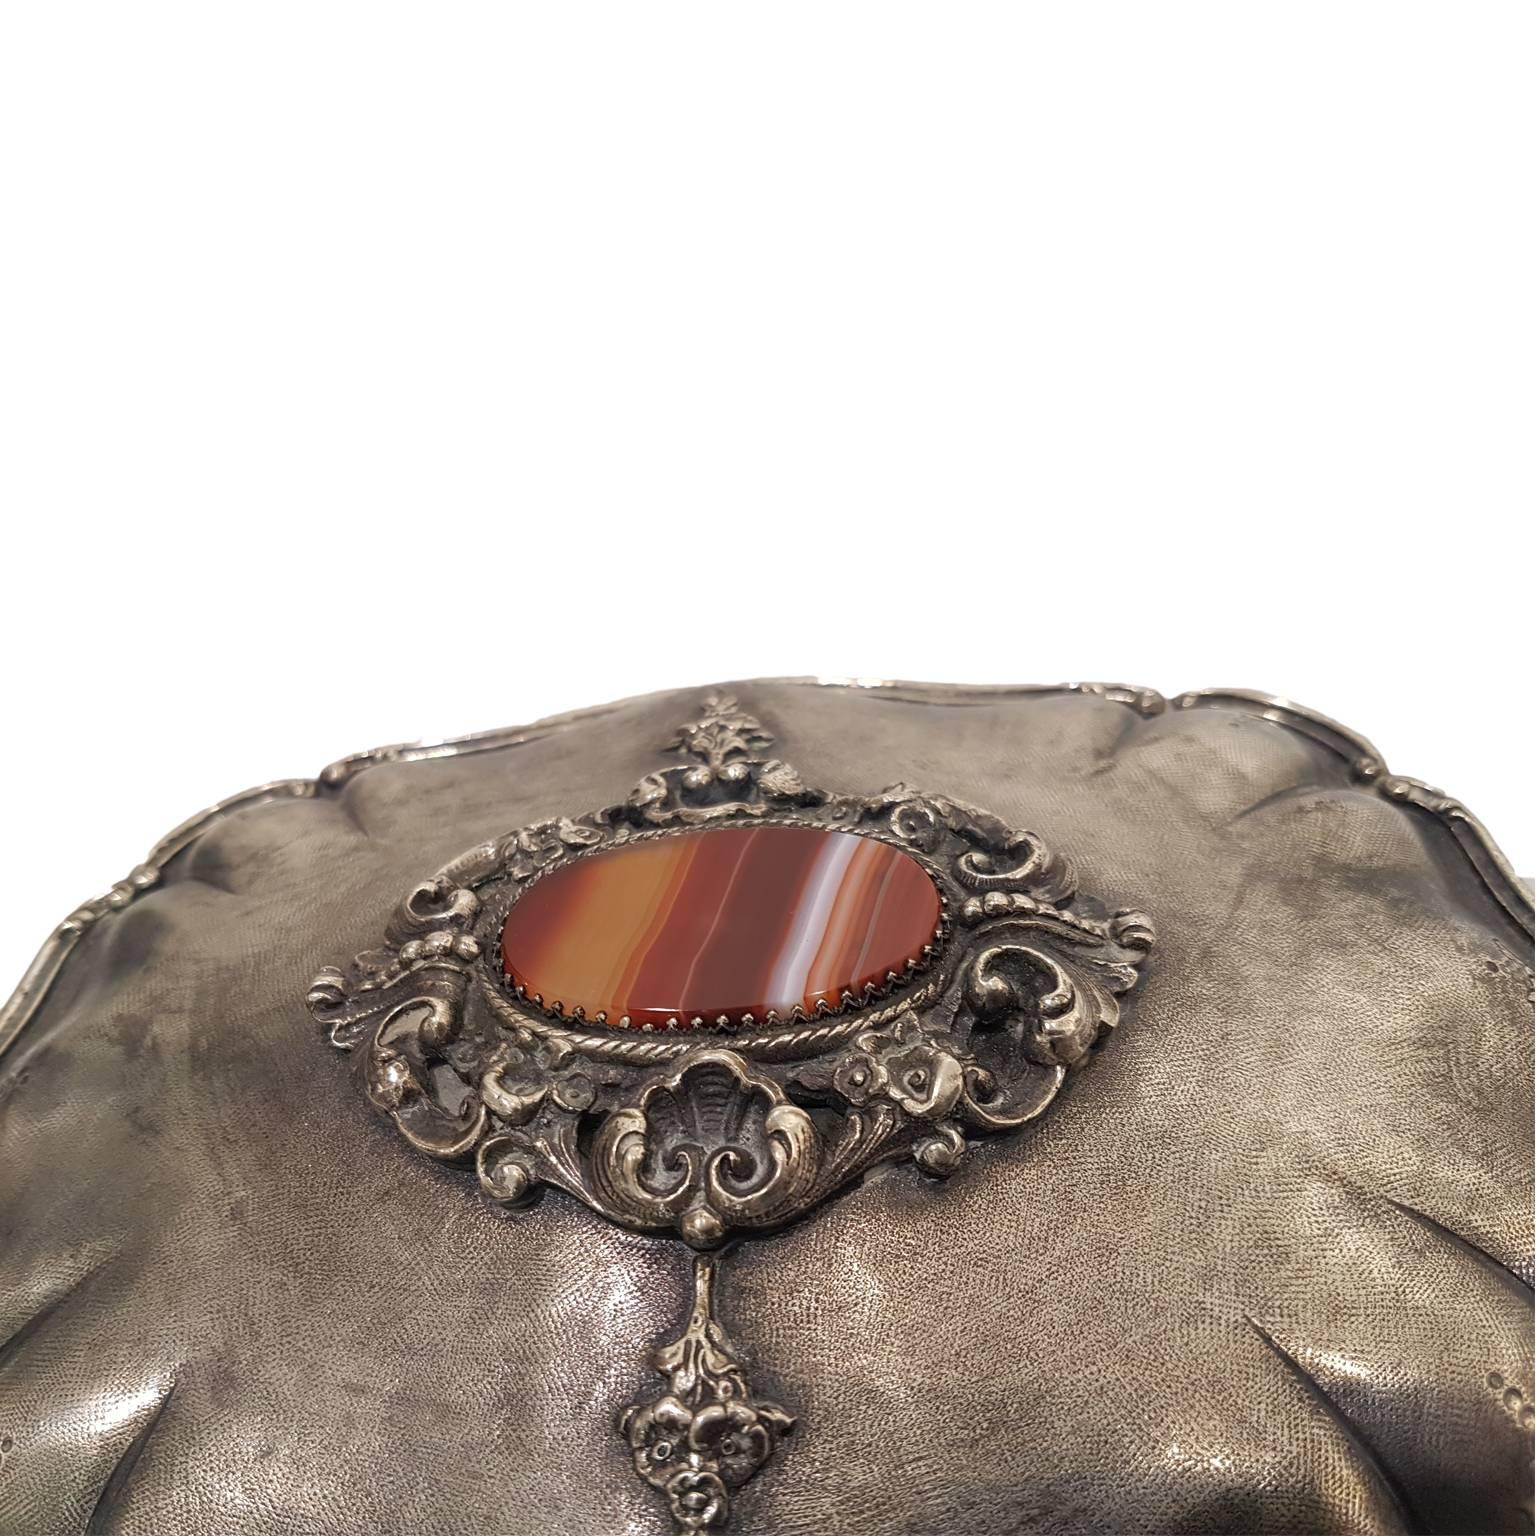 Silver jewel box with entirely engraved with burin, with bent profile, floral decorations, hinged lid with a red agate in the middle of the top.

Inside the box, we can read: “ A Elena Rizzieri, il teatro Sociale di Rovigo che la vide debuttante e